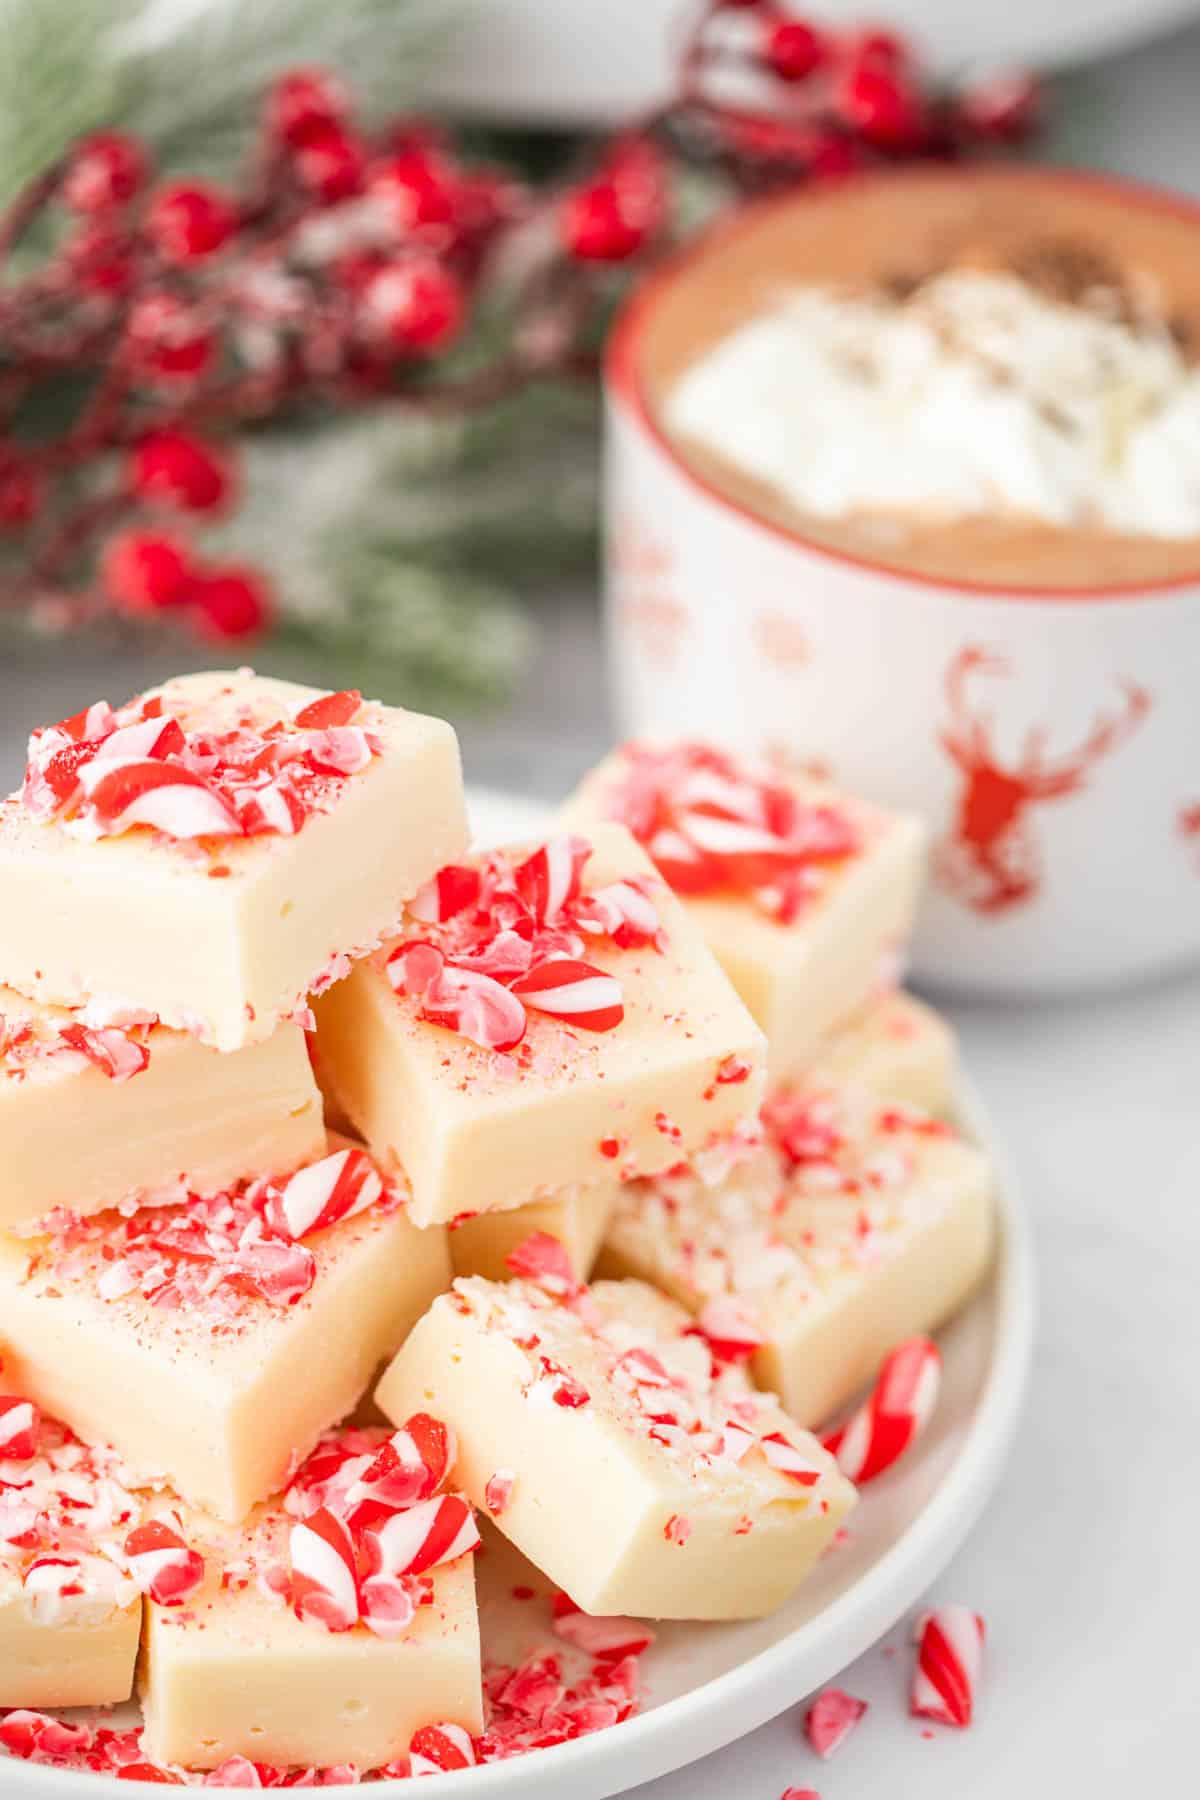 A plate of peppermint fudge pieces with hot cocoa and Christmas decor in the background.